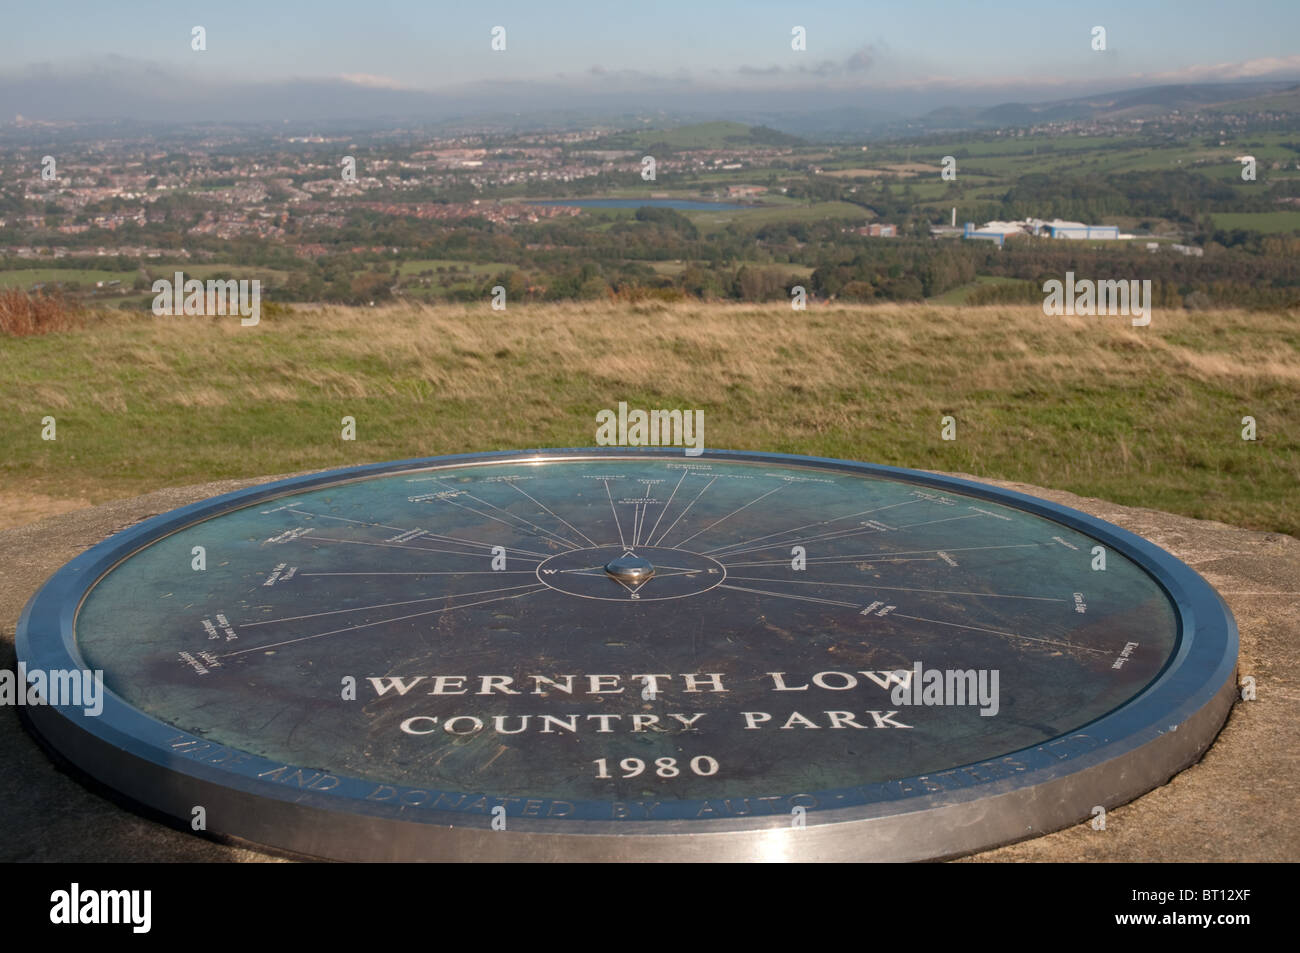 Werneth Low Country Park 200 acres on the northern and western slopes of Werneth Low, 9.5 miles from Manchester city centre. Stock Photo